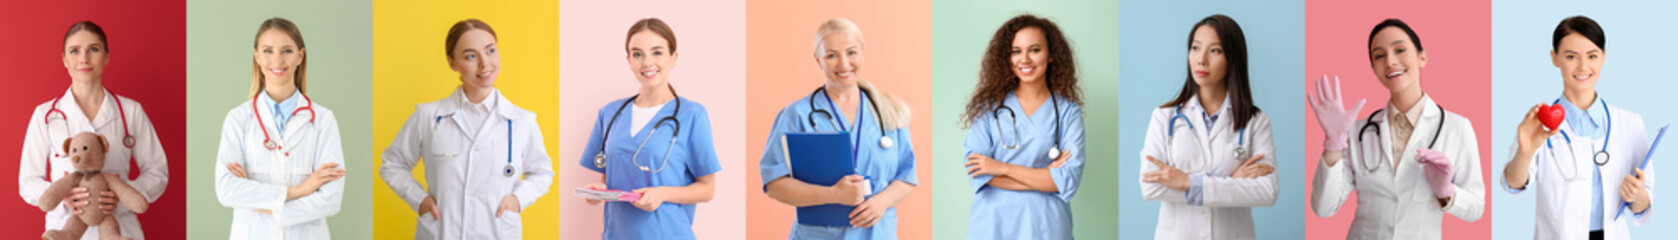 Collage with female doctors on colorful background